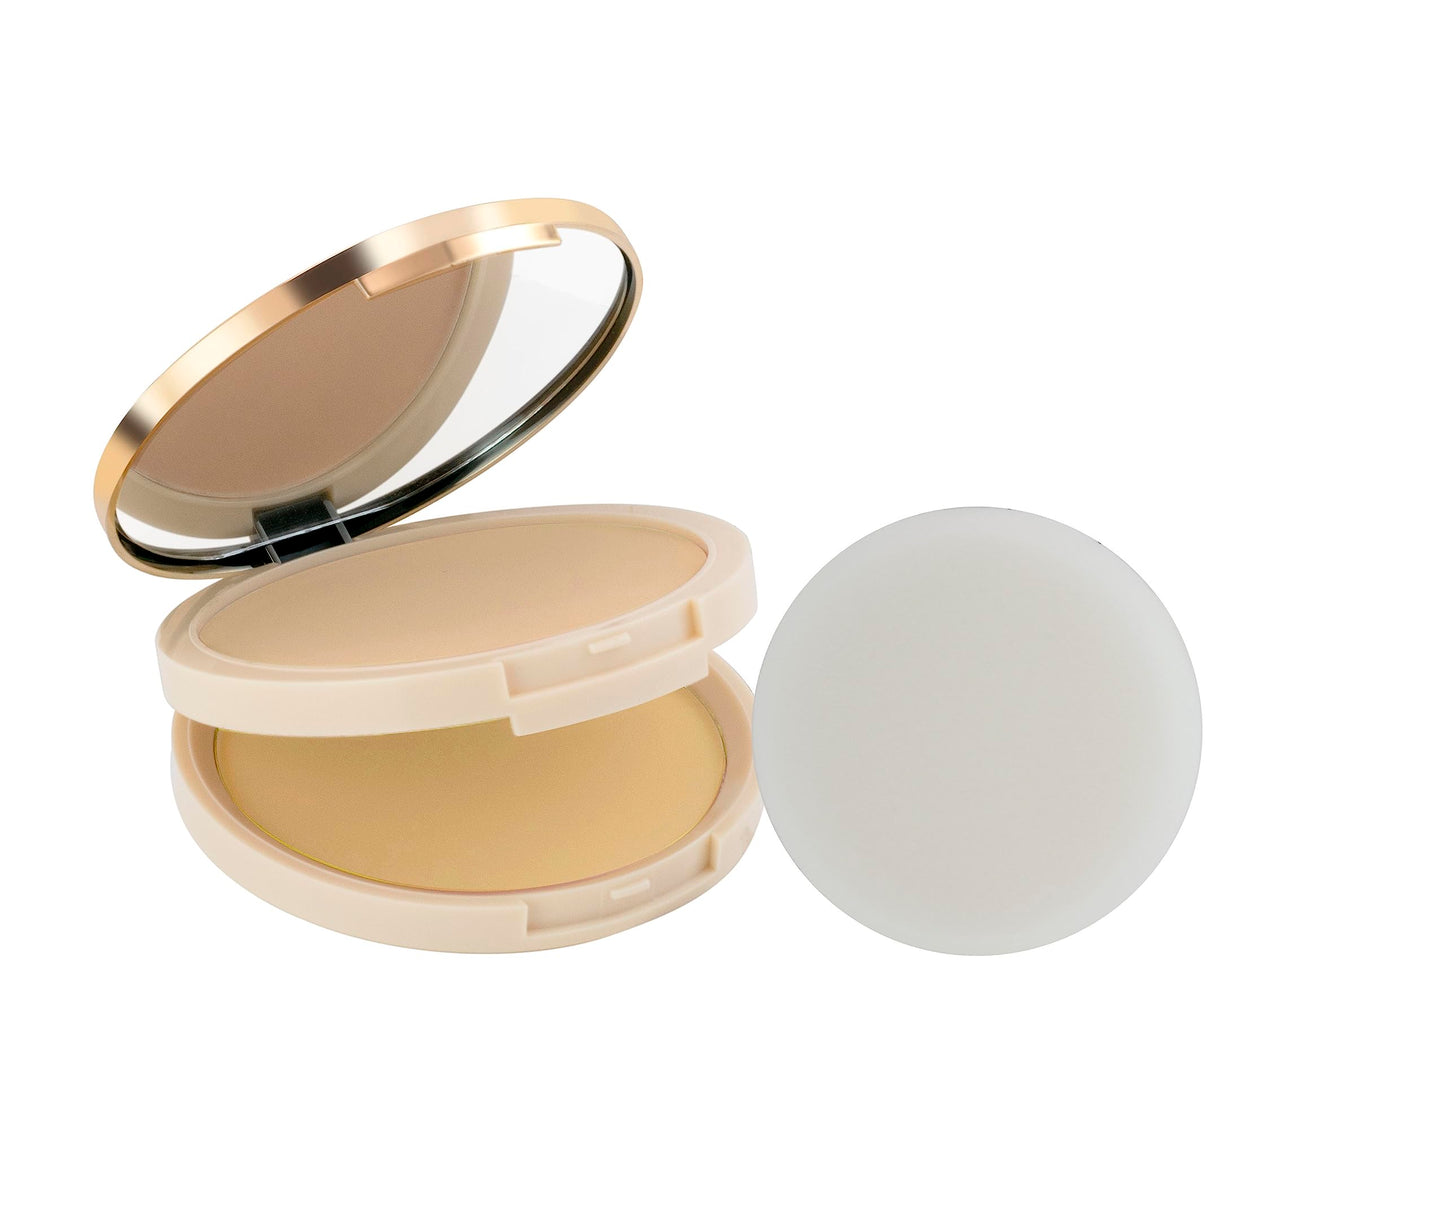 MARS 2in1 Pop Pancake for Blemish Face Compact Powder 40 g (Shade-01)